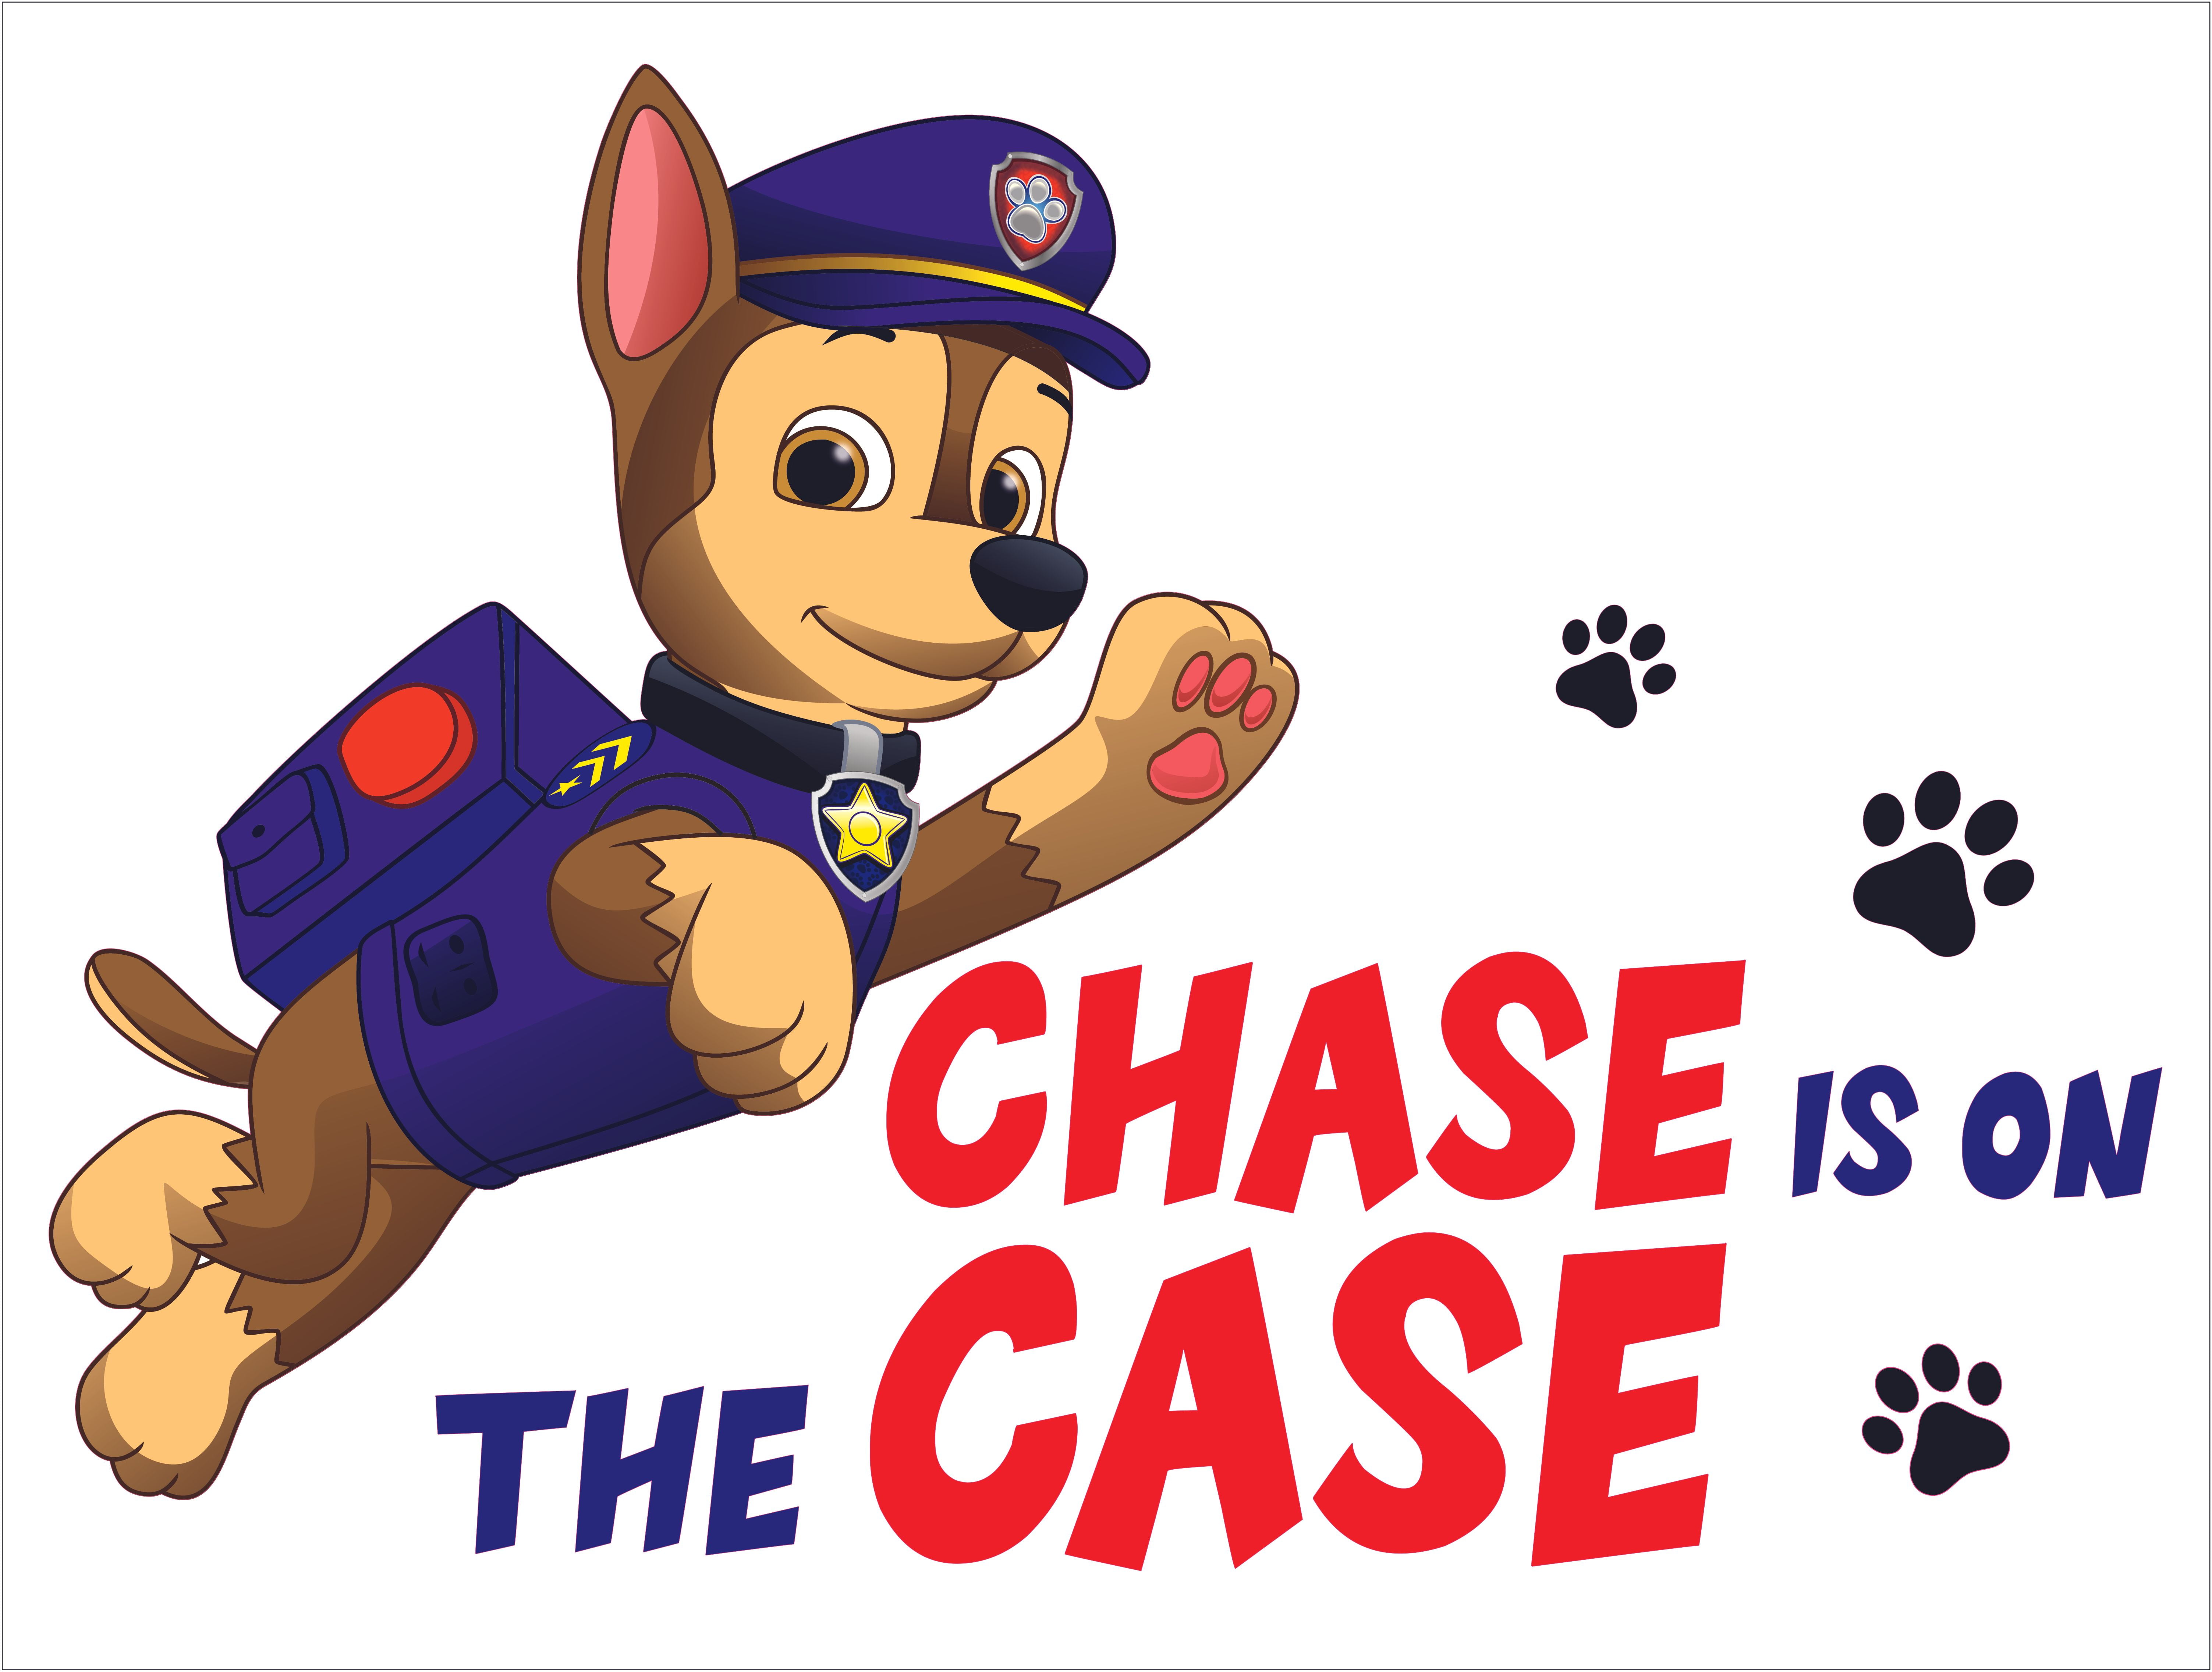 Living Room Home Art Chase Police &traffic Cop Decor Design Wall Decal Quotes - x 20" Kids Bedroom Search & Rescue Mighty Pups Paw Patrol Adhesive Decoration Sticker - Chase